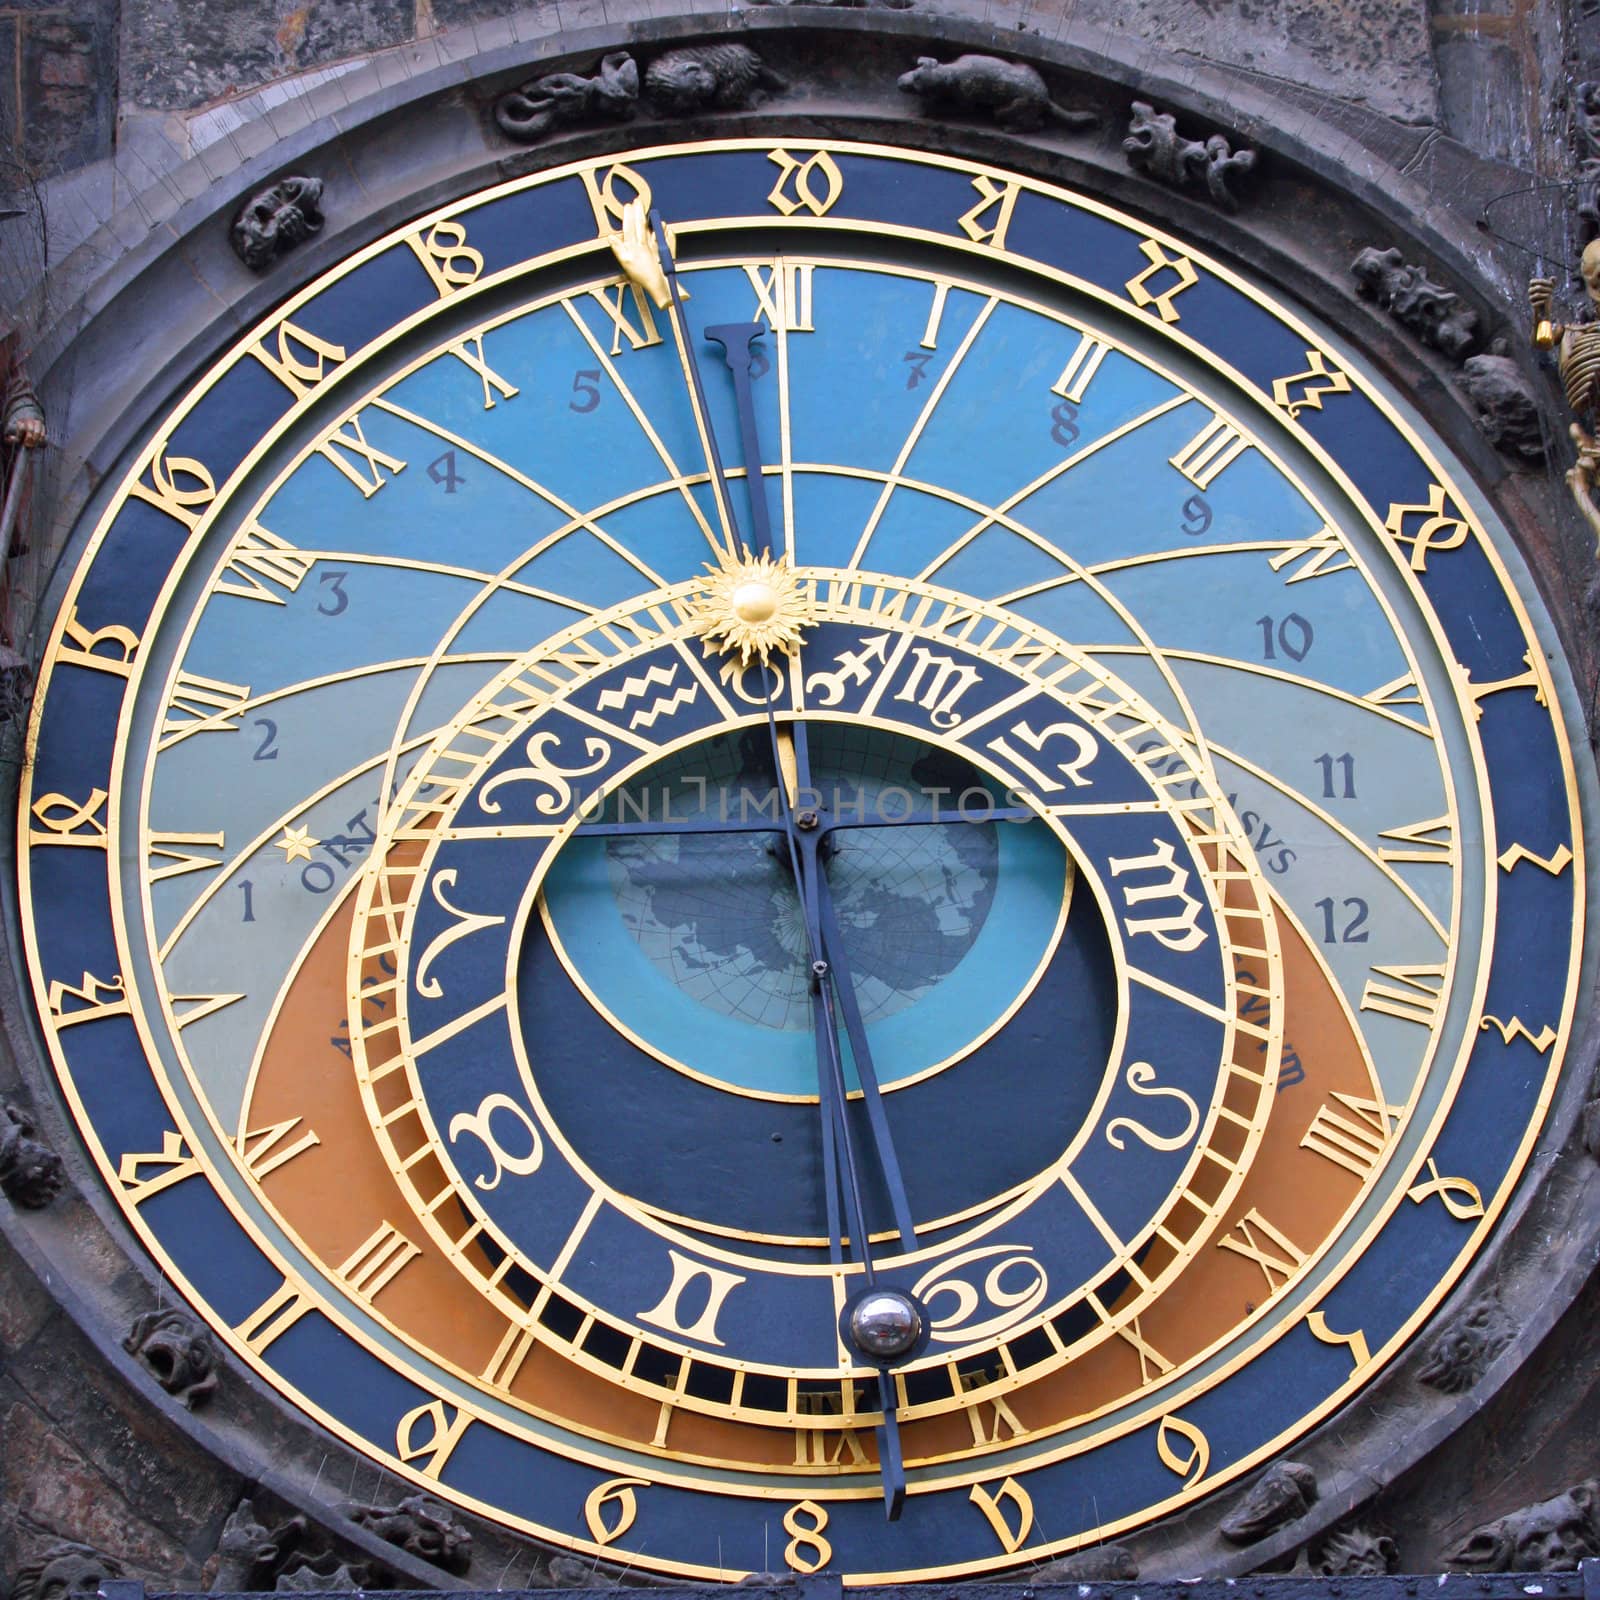 The Prague Astronomical Clock  is a medieval astronomical clock located in Prague, Chzech Republic